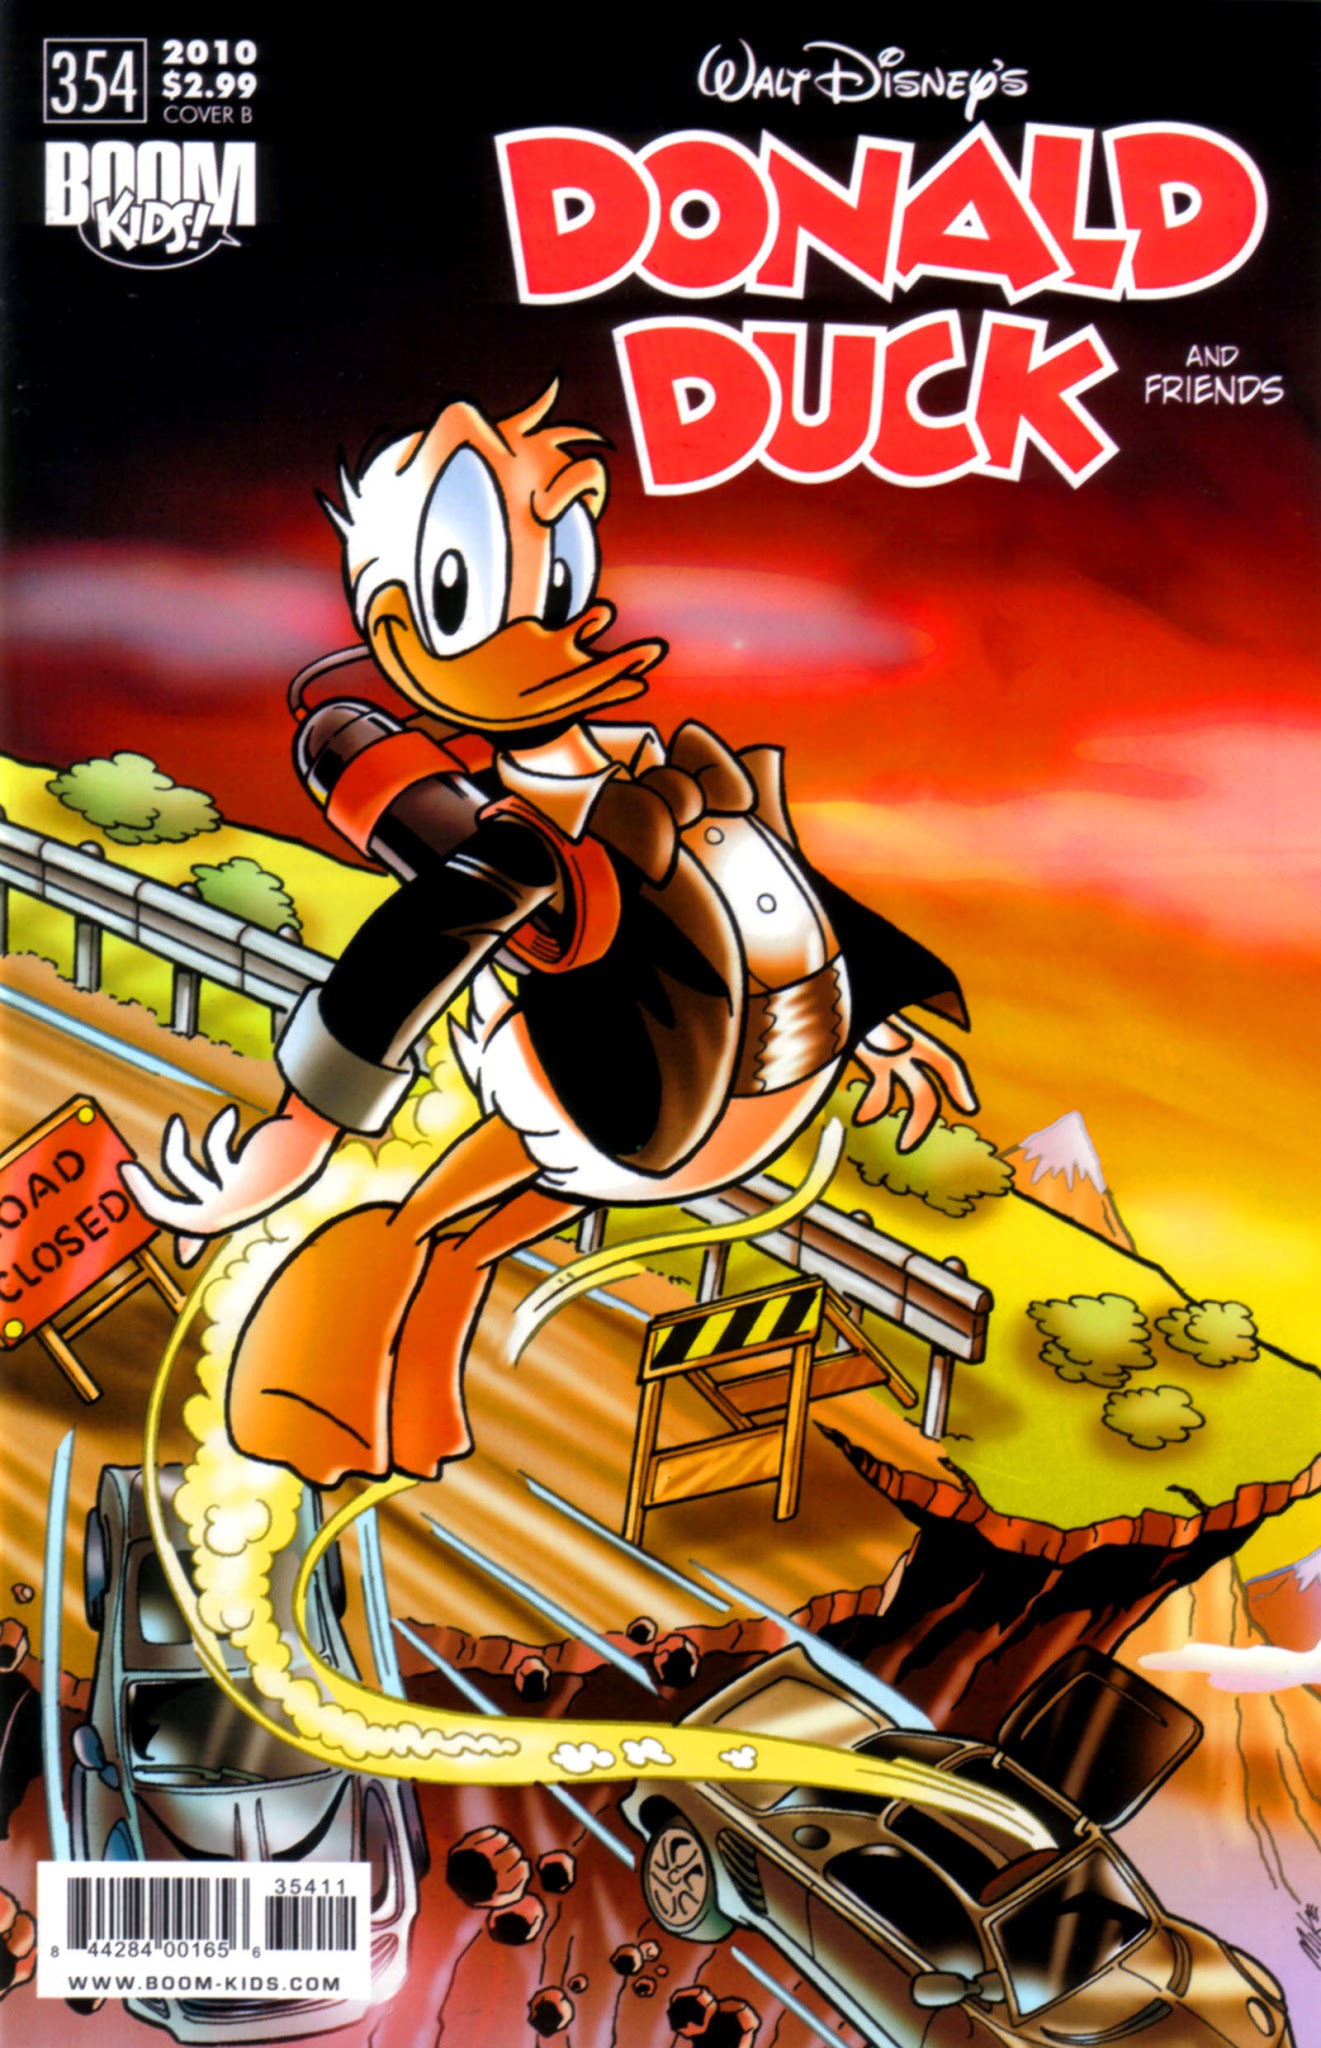 Read online Donald Duck and Friends comic -  Issue #354 - 2